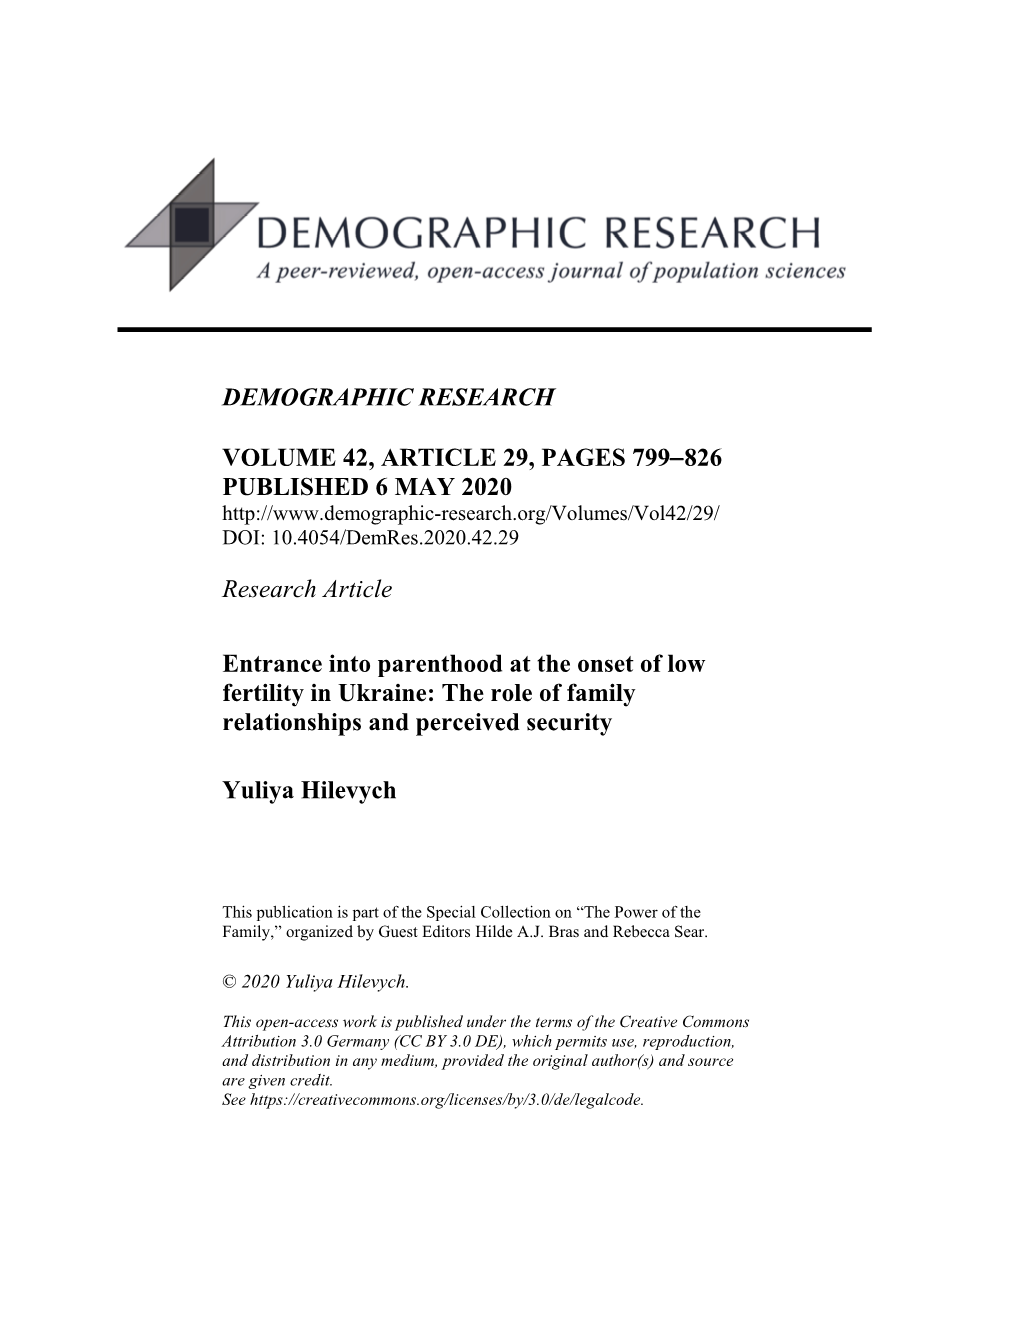 Entrance Into Parenthood at the Onset of Low Fertility in Ukraine: the Role of Family Relationships and Perceived Security